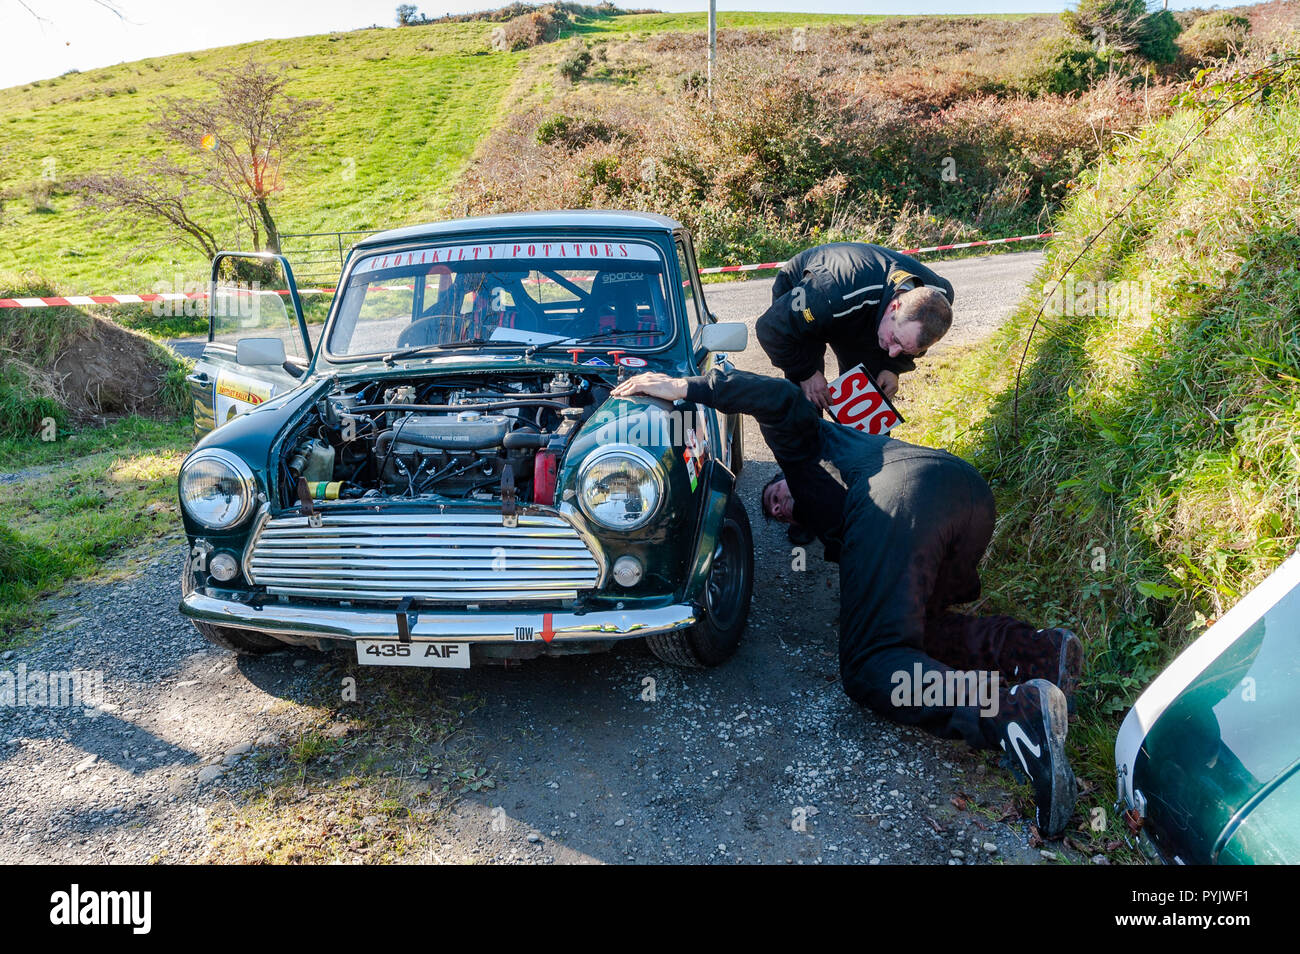 Ballydehob, West Cork, Ireland. Driver Maurice Whelton and his Navigator Ivan Bennett pulled out of the rally due to a broken shock on their Austin Mini during a stage of the Fastnet Rally 2018 organised by Skibbereen Car Club. Credit: Andy Gibson/Alamy Live News. Stock Photo